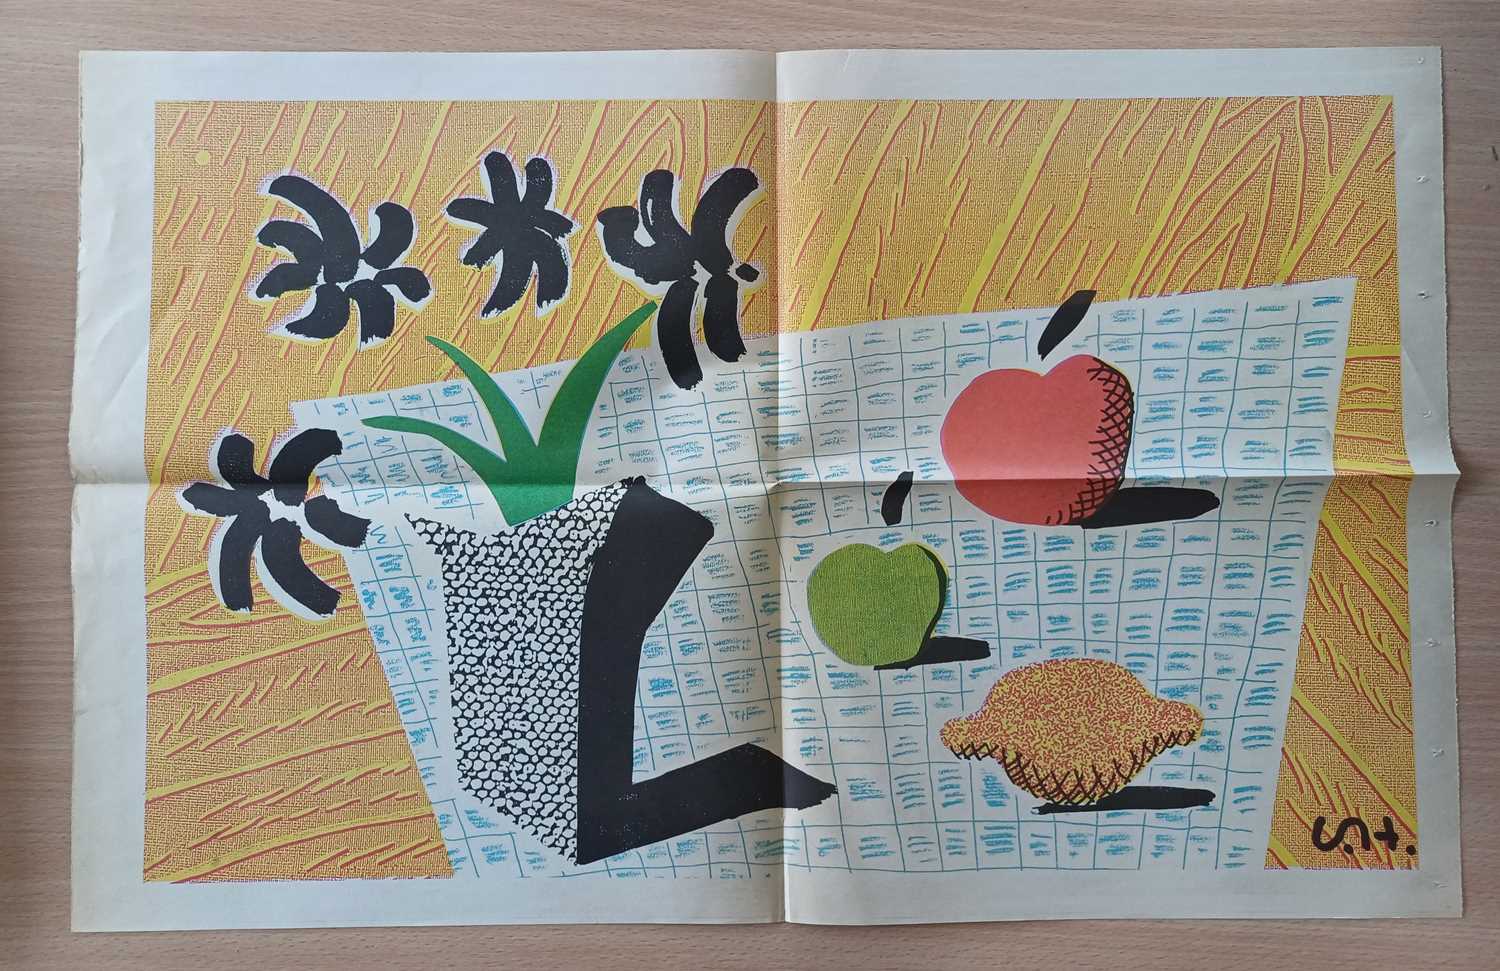 Hockney (David) ‘Two Apples & One Lemon & Four Flowers’, lithographic colour print described on - Image 7 of 7